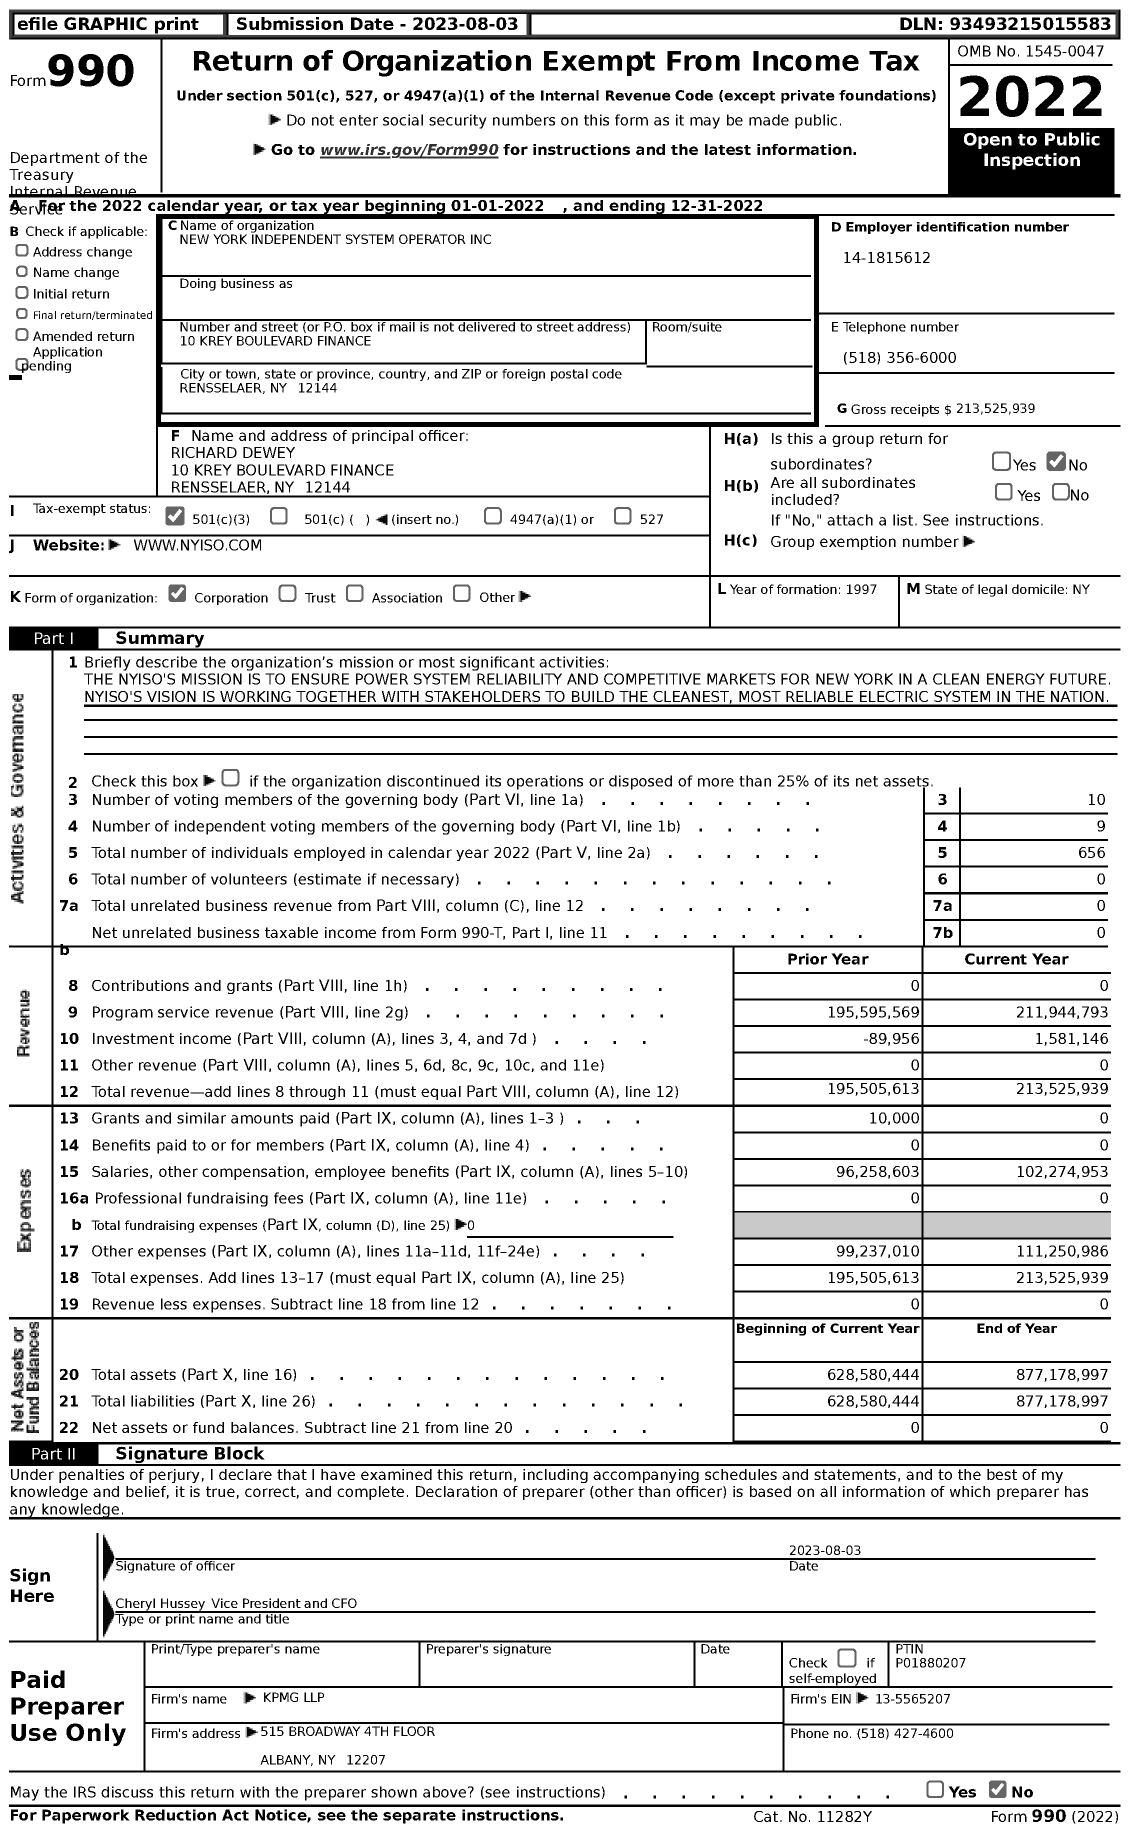 Image of first page of 2022 Form 990 for New York Independent System Operator / Cheryl Hussey (NYISO)